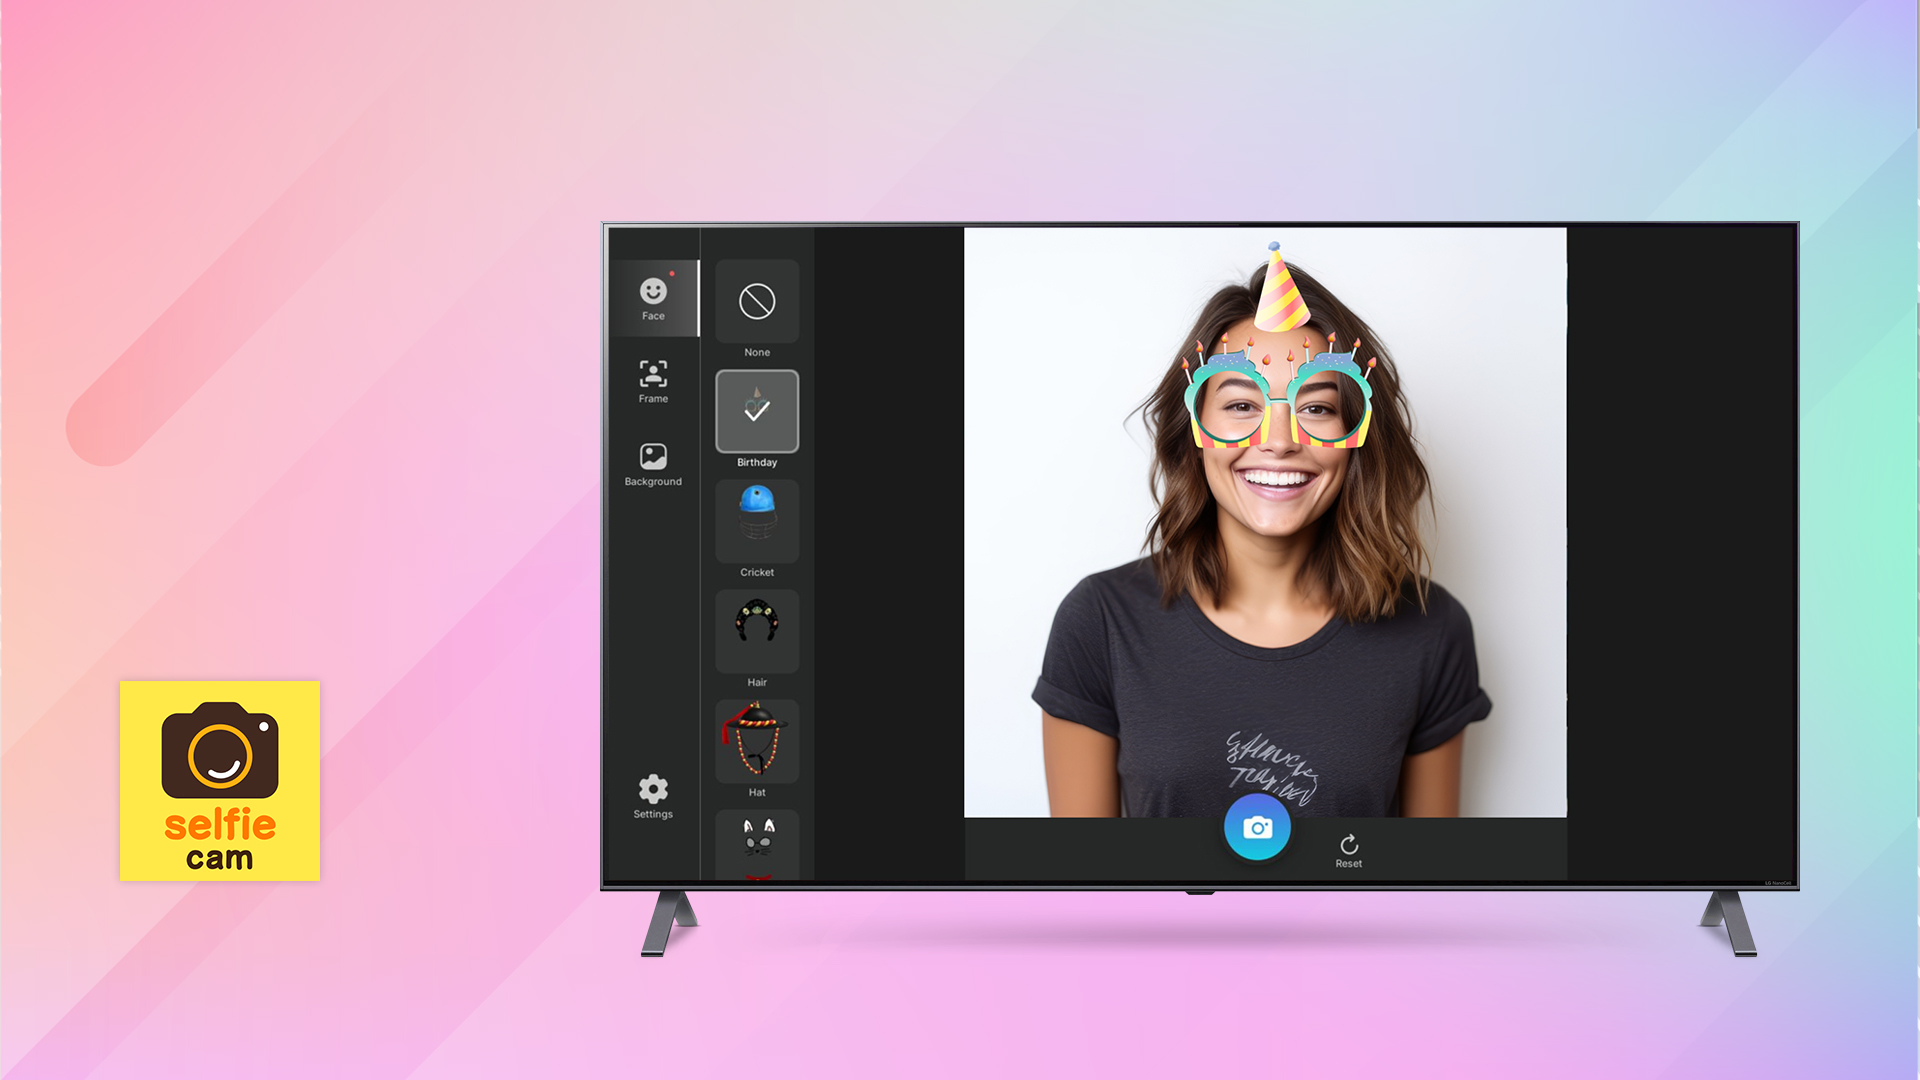 An LG Smart TV display shows the Selfie Cam feature for photo editing